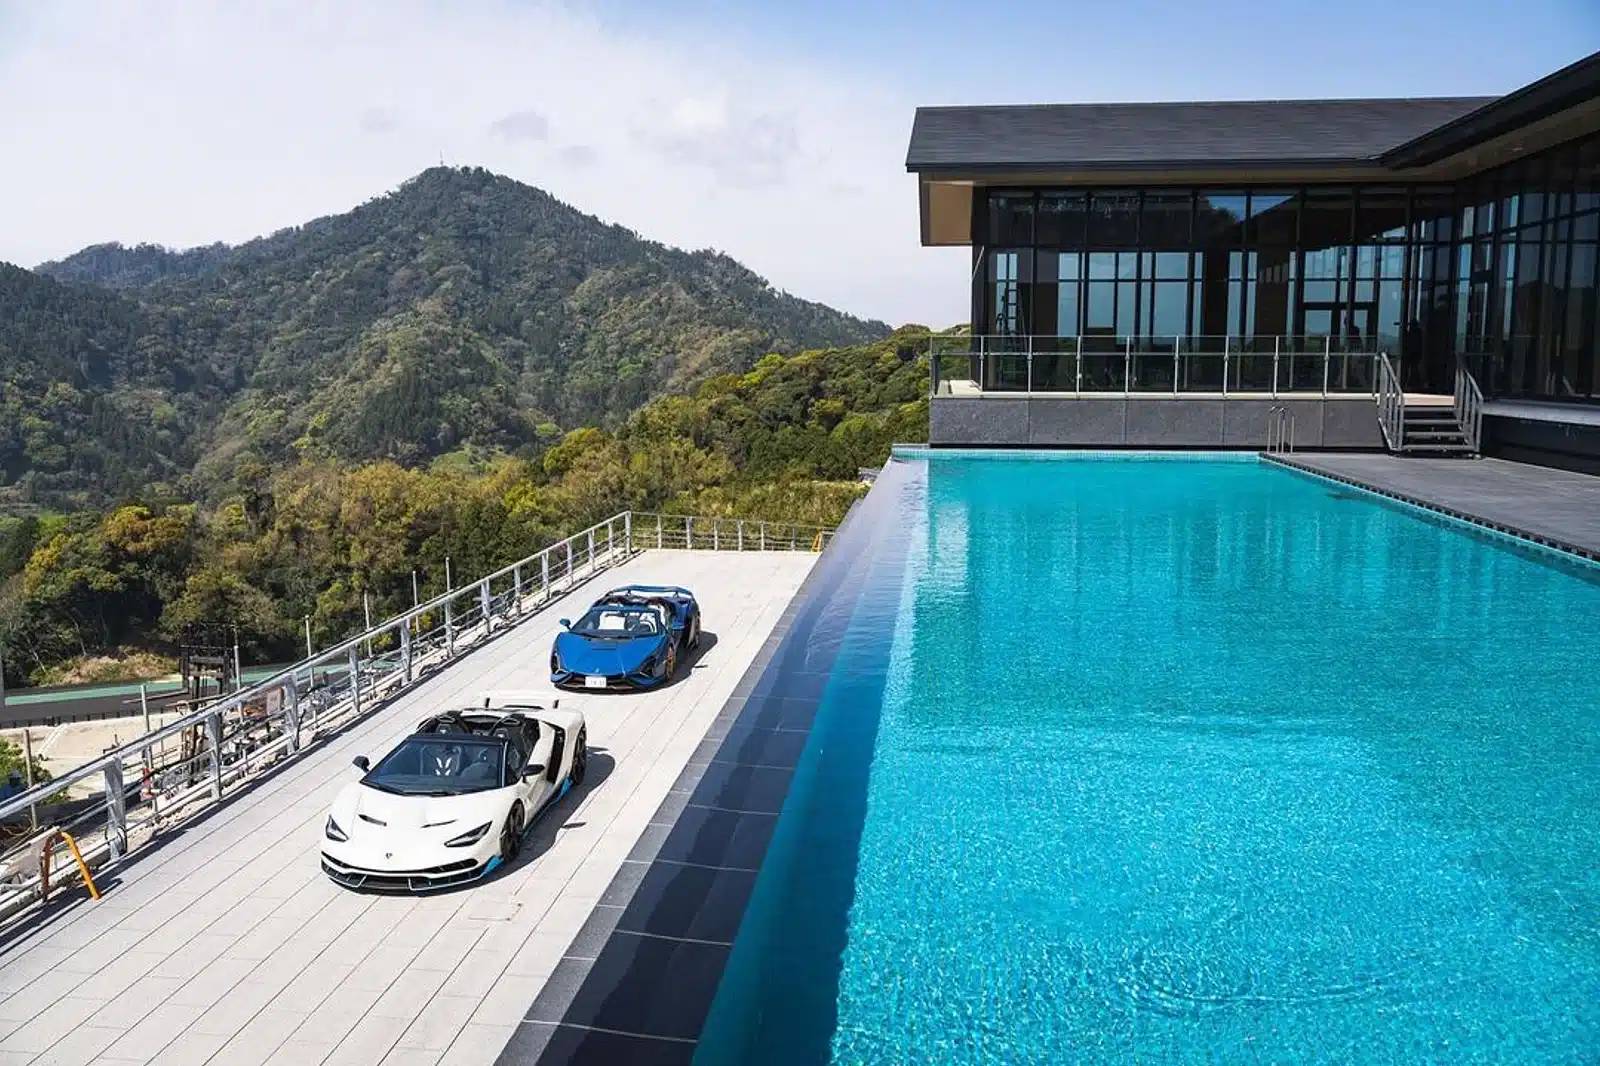 Billionaire Builds Asia’s First Private Driving Club in Japan for $160 Million